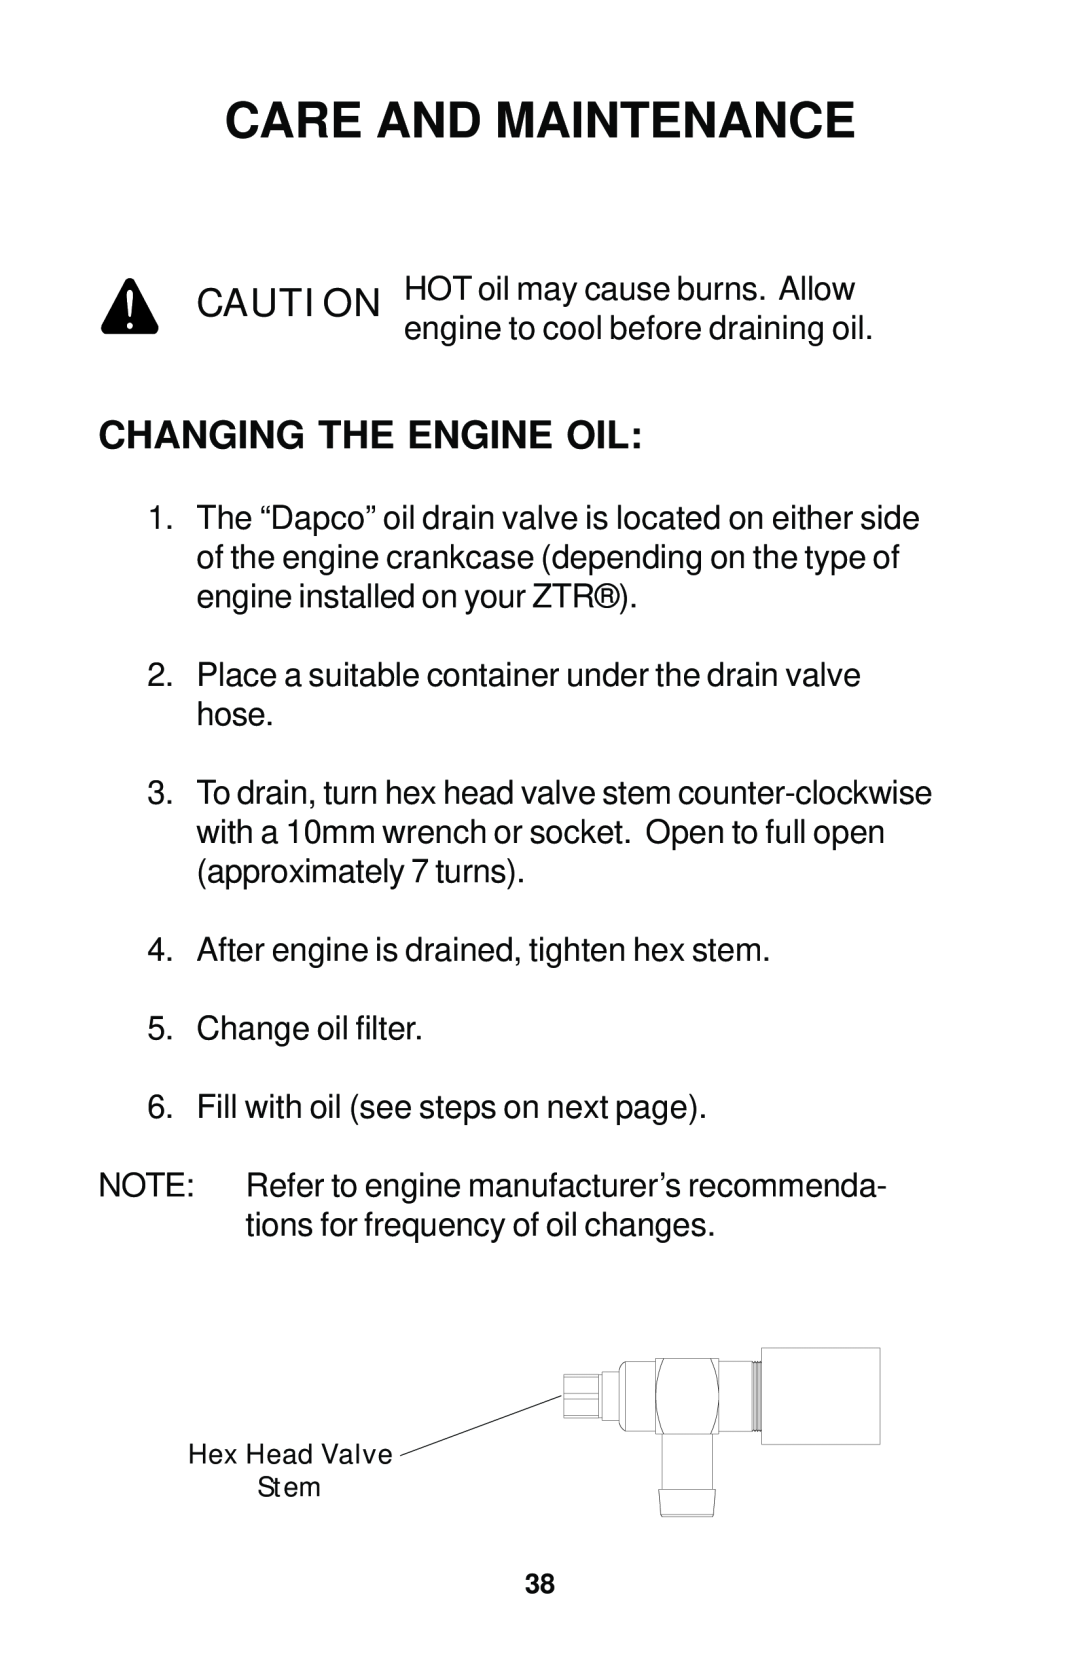 Dixon 12881-1104 manual Changing The Engine Oil, Care And Maintenance 